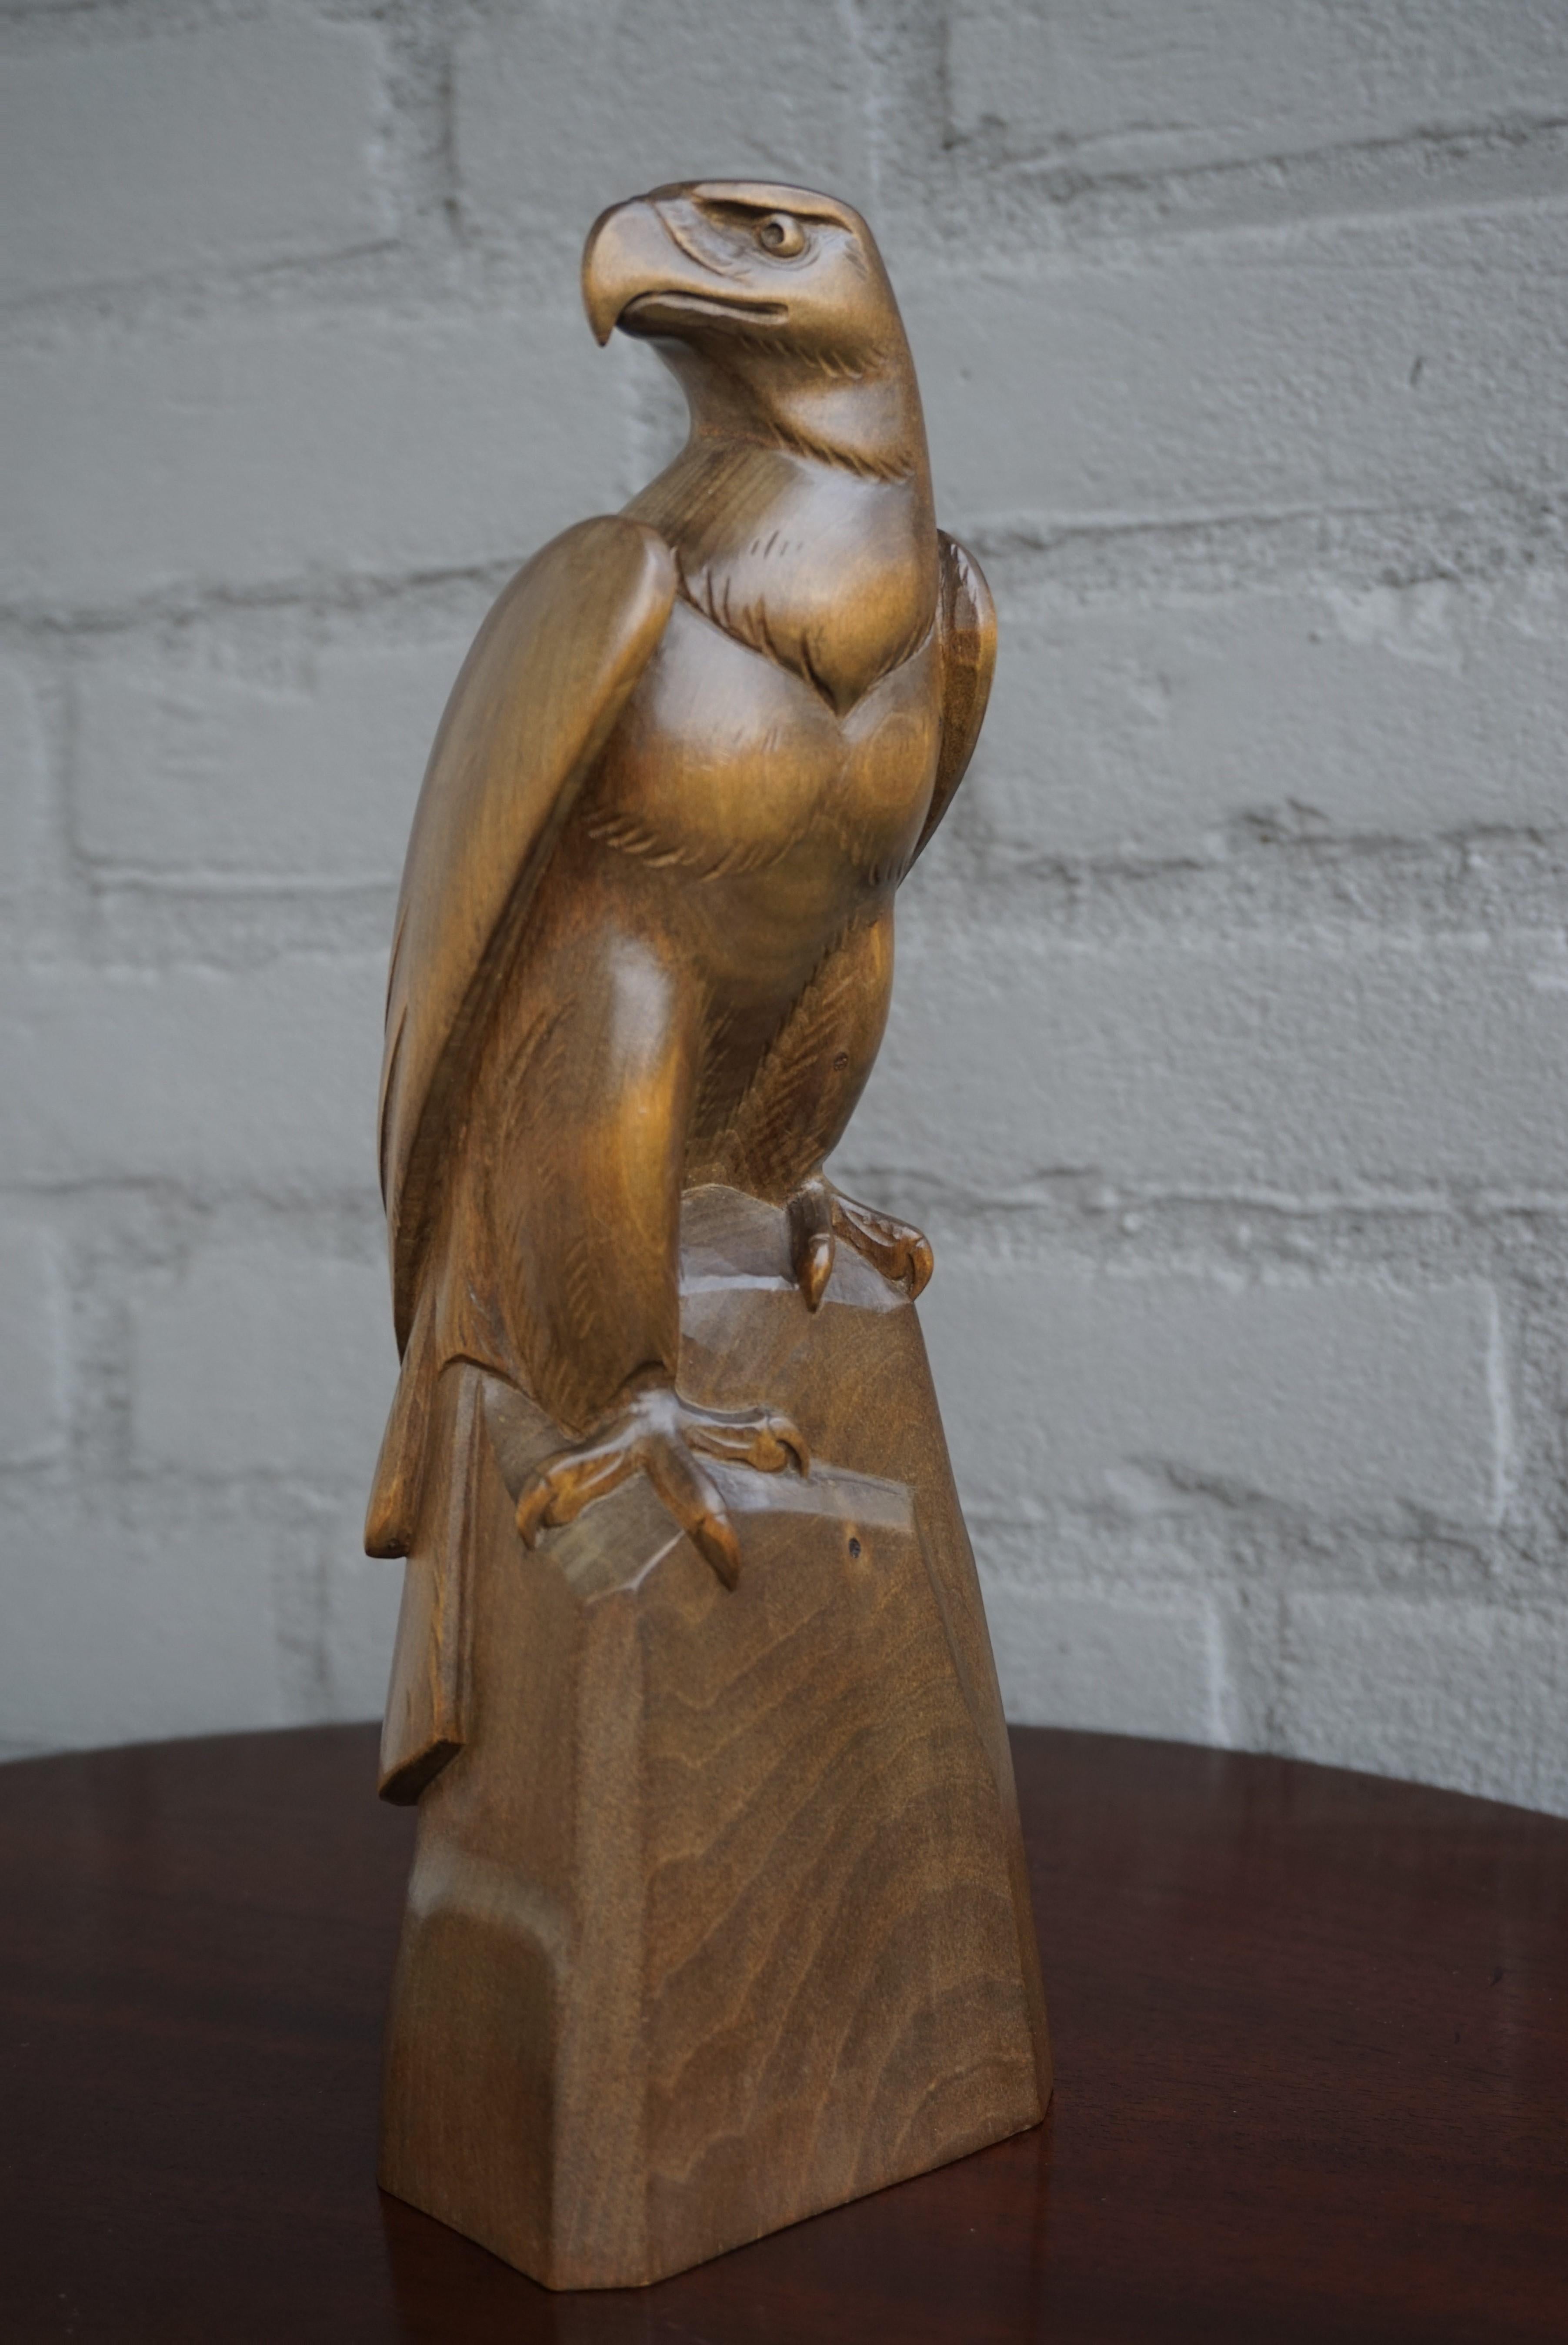 Quality carved, mint condition and majestic bird of prey.

This stunning bald eagle sculpture stands out, because the artist has managed to create a perfectly realistic eagle without trying to make it overly detailed. This eagle's body posture is